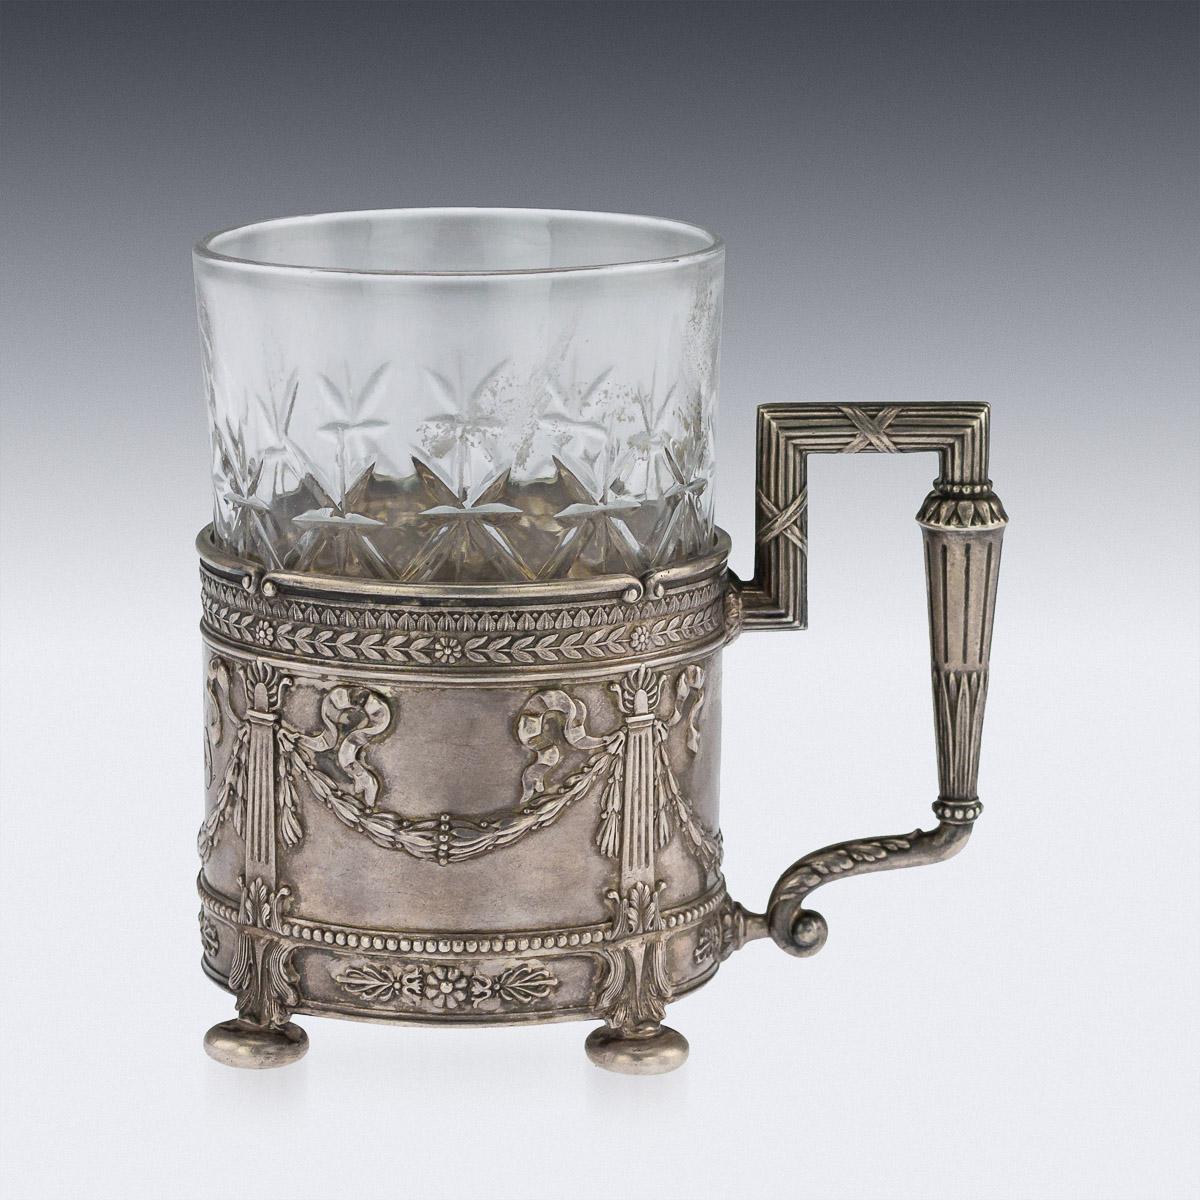 Antique early 20th century Russian Empire style solid silver and cut glass tea holder, of straight cylindrical form, the glass cut with star facets, silver decorated with intertwining ribbon tied columns and laurel leaf swags, laurel boarders with